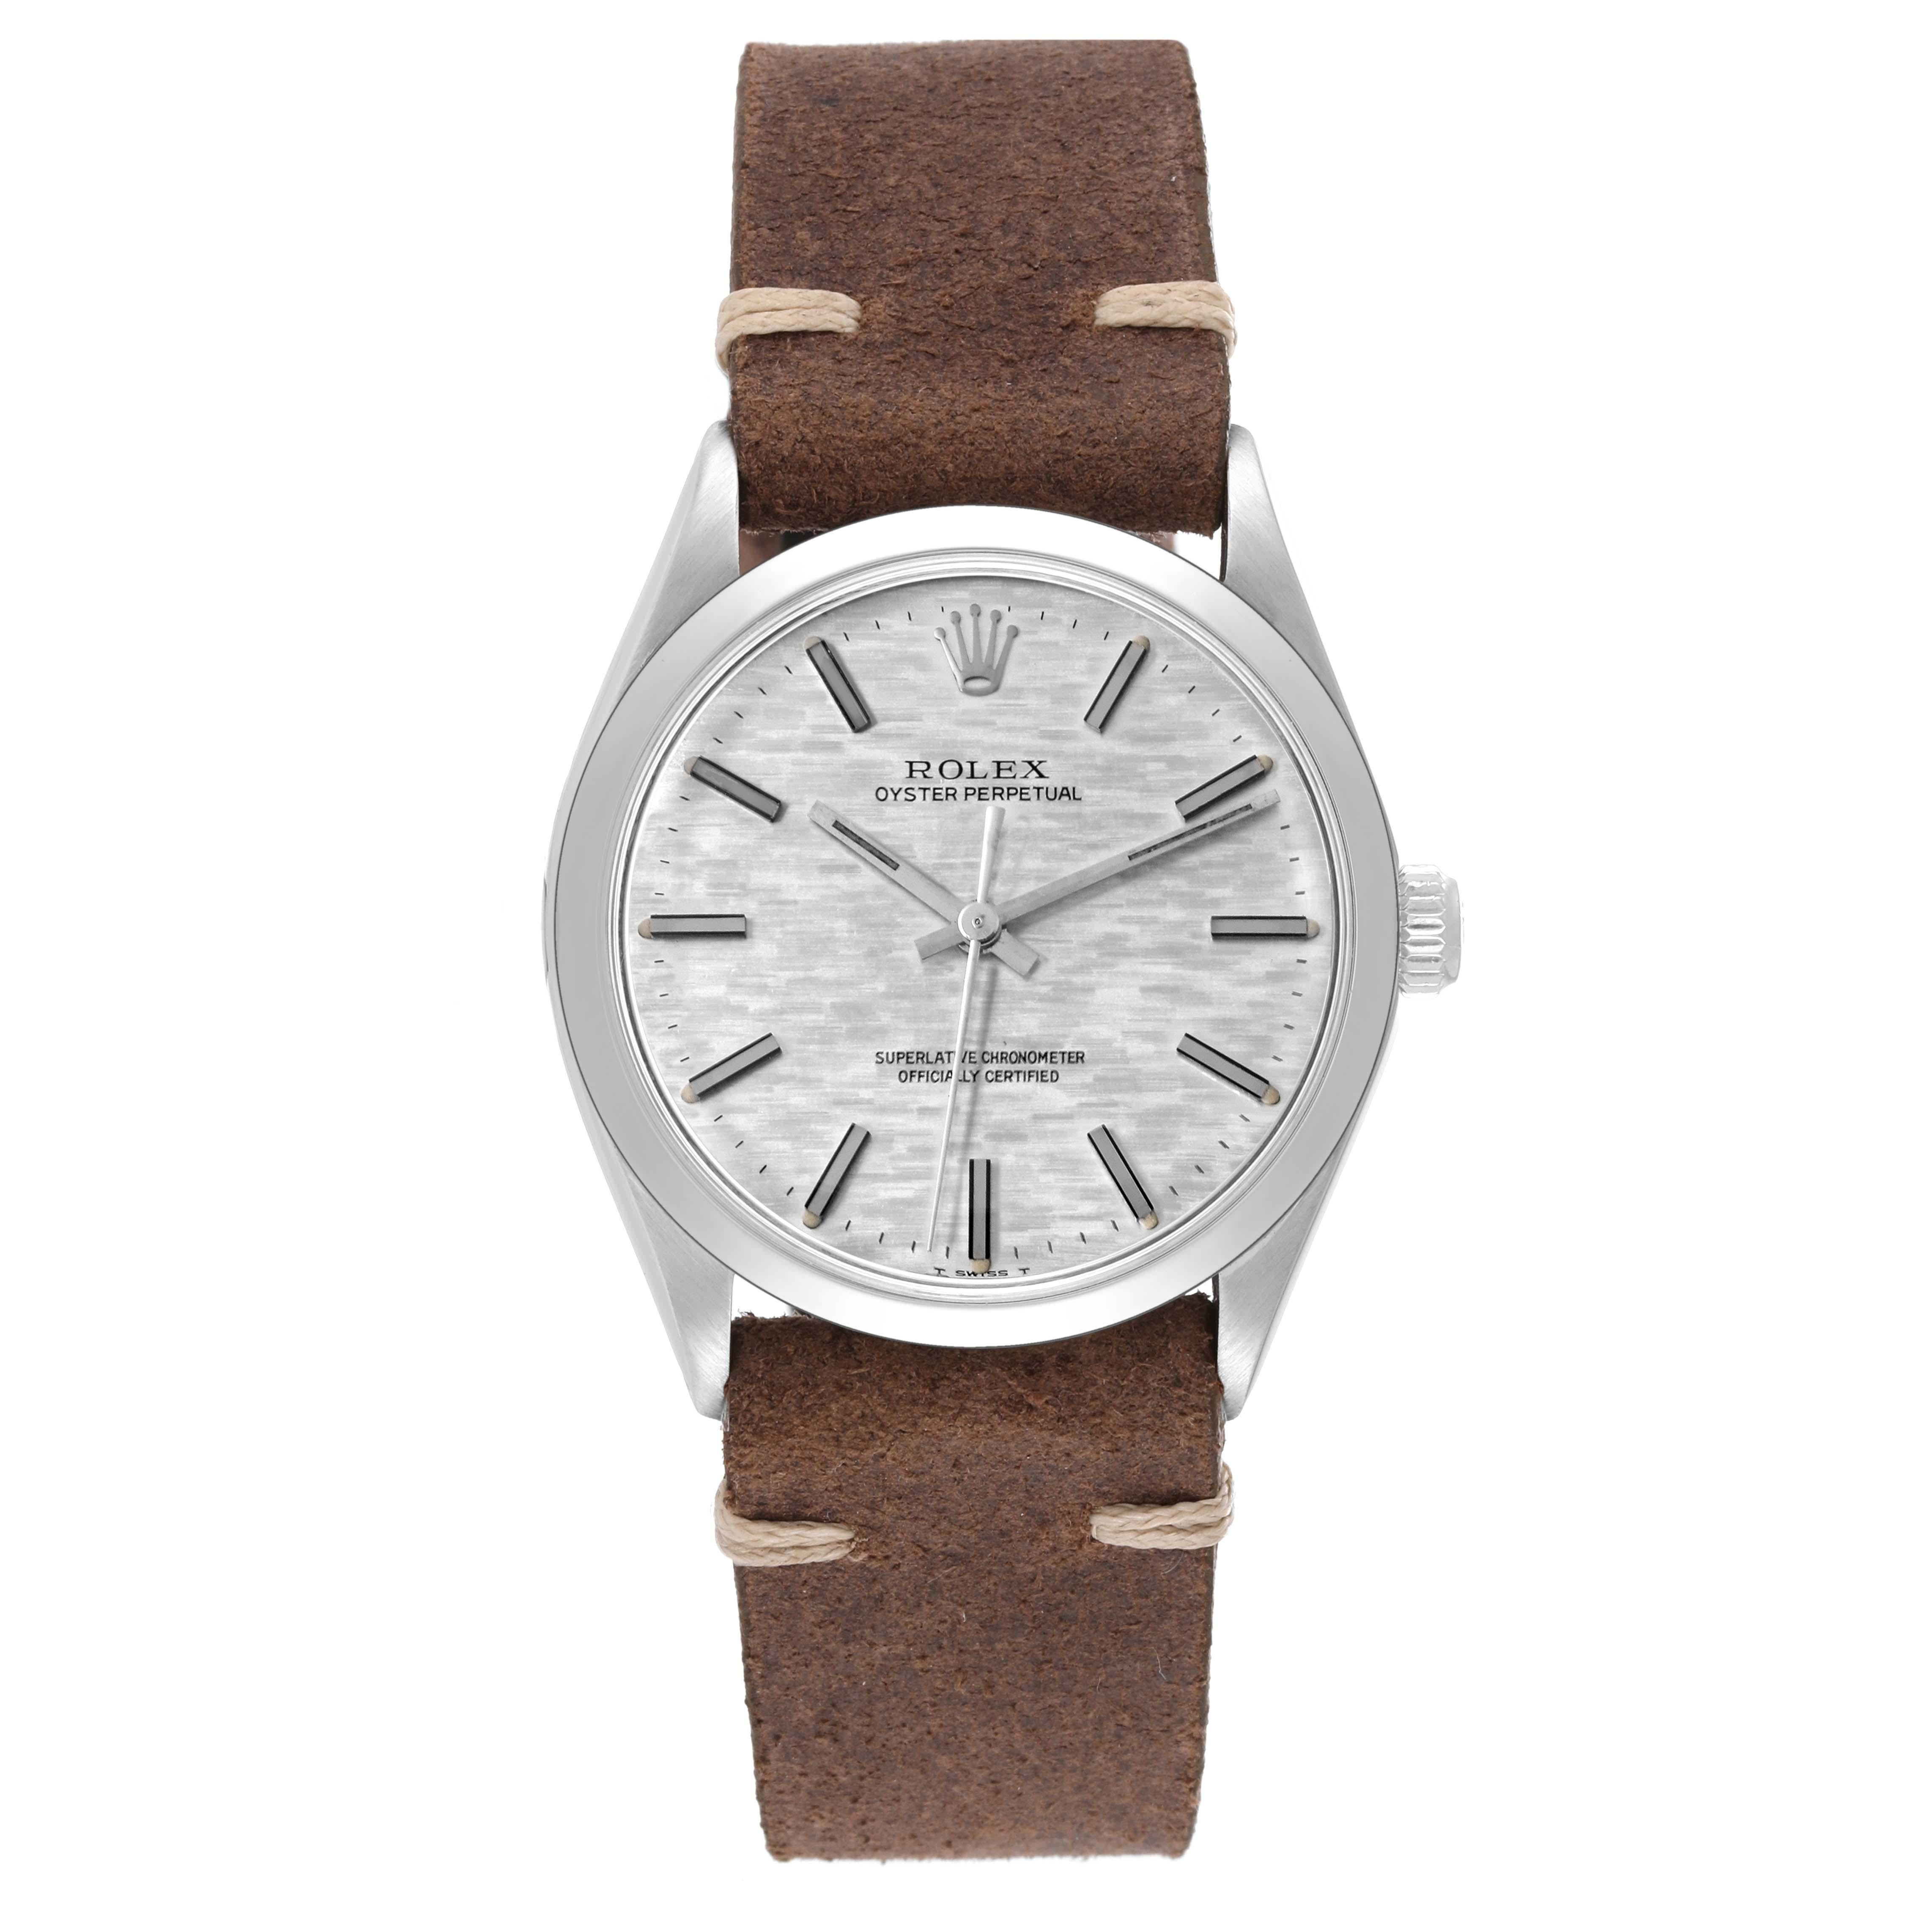 Rolex Oyster Perpetual Silver Brick Dial Vintage Steel Mens Watch 1002. Officially certified chronometer automatic self-winding movement. Stainless steel oyster case 34.0 mm in diameter.  Rolex logo on the crown. Stainless steel smooth bezel. Domed